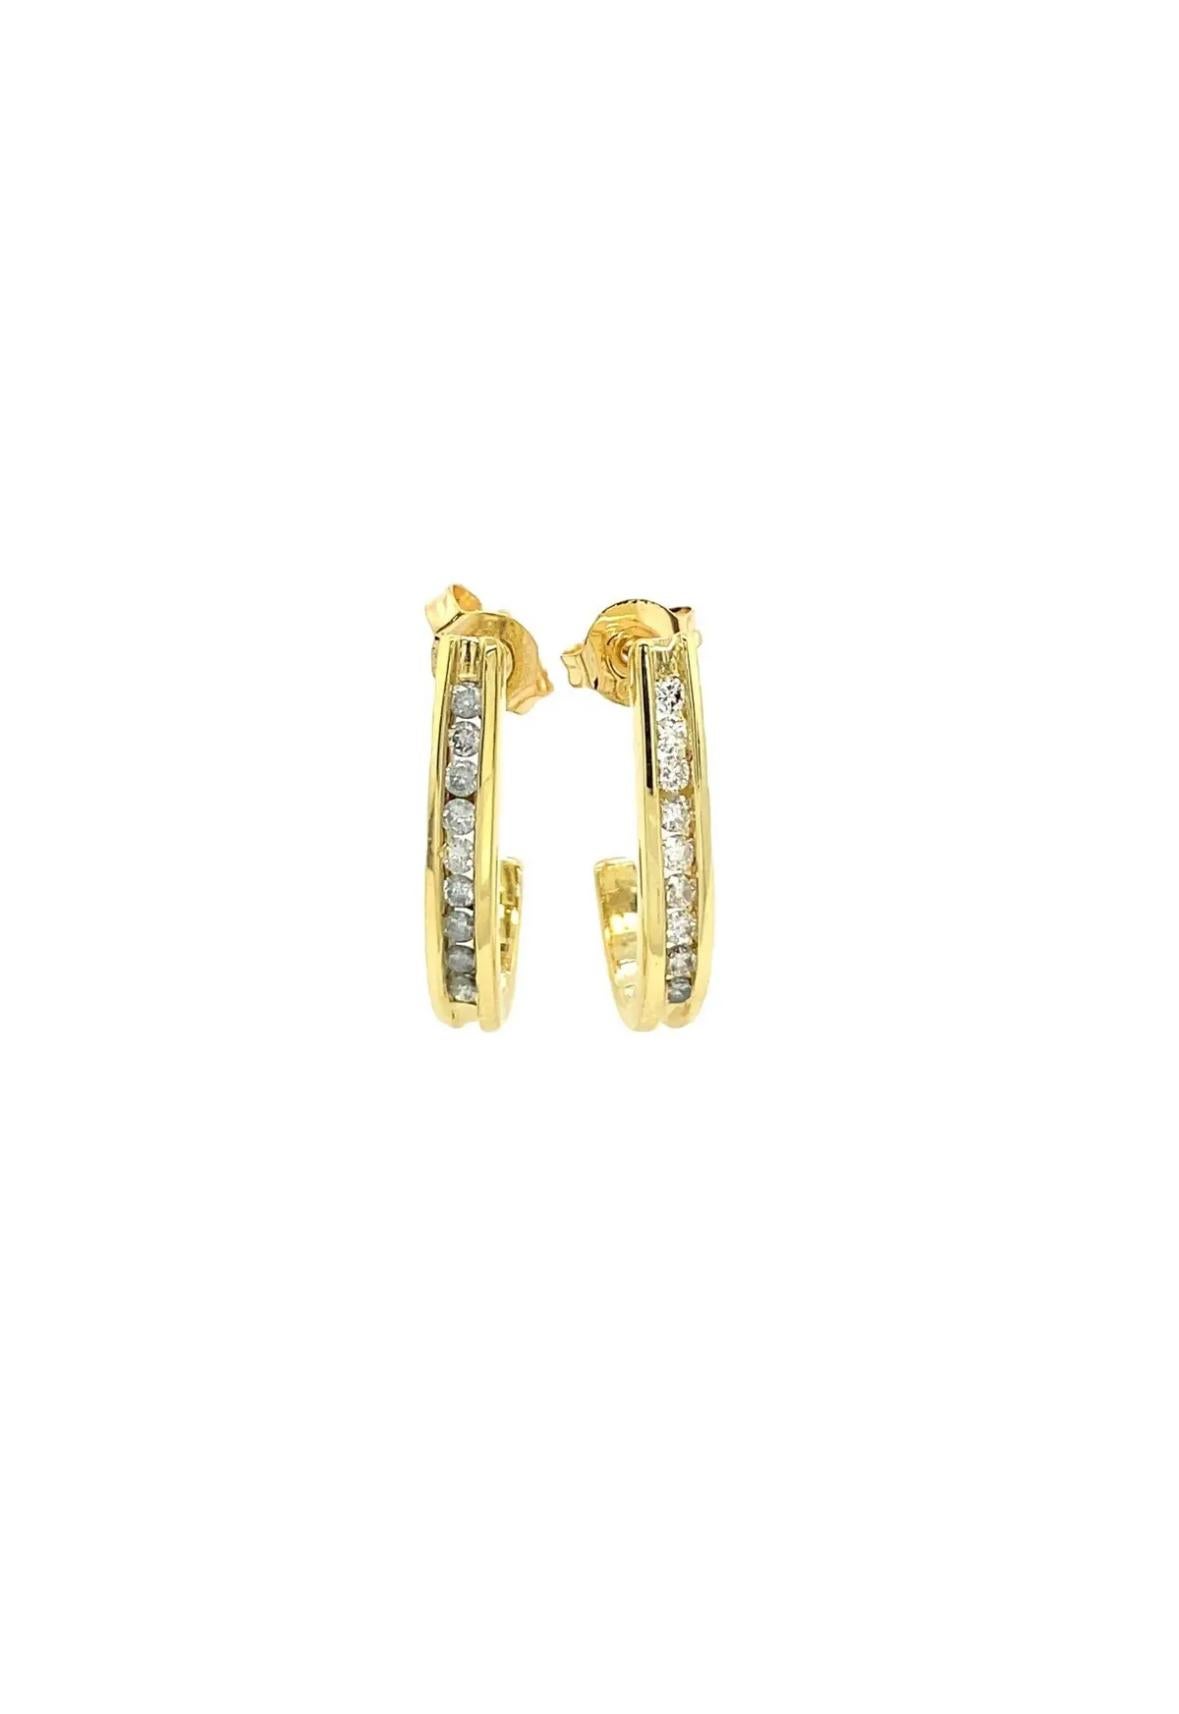 Diamond Huggie Earrings Set with 0.25ct of Diamonds in 18ct Yellow Gold In Excellent Condition For Sale In London, GB